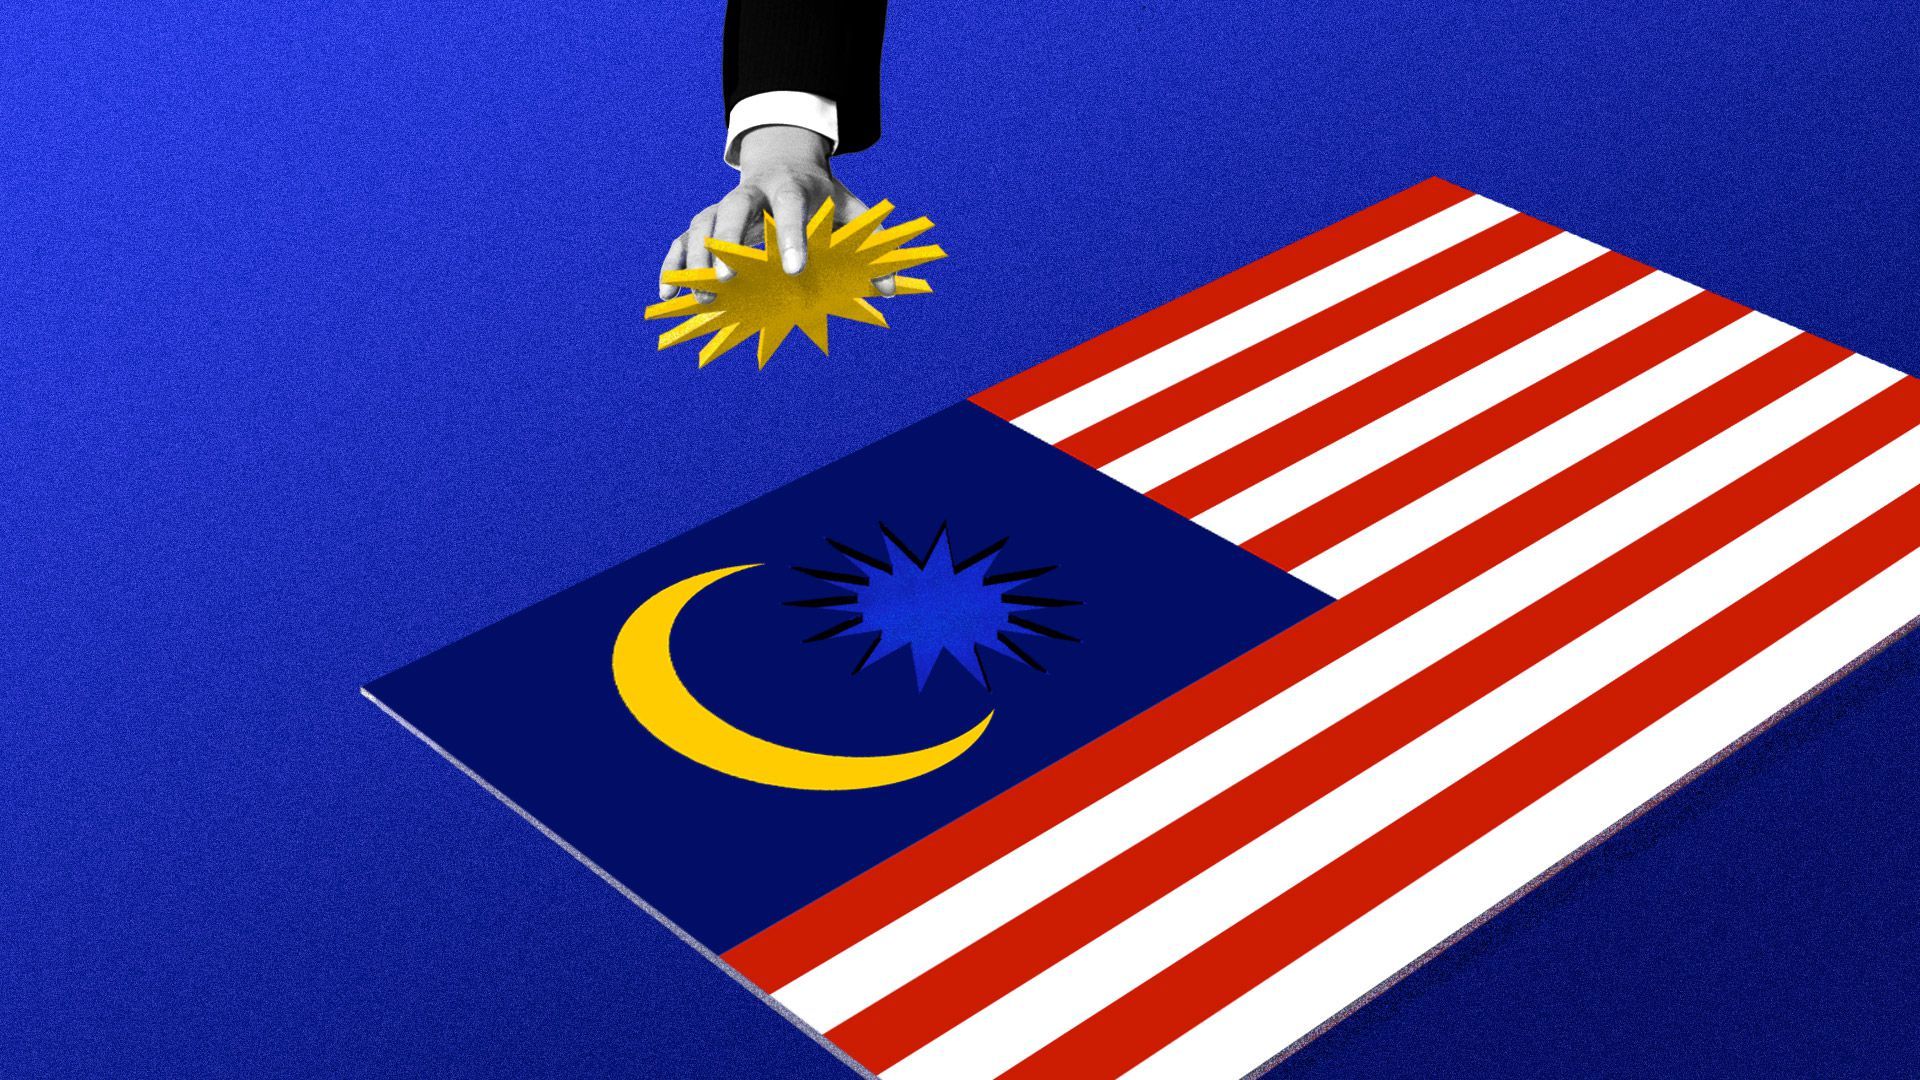 Goldman steals the star out of the Malaysian flag